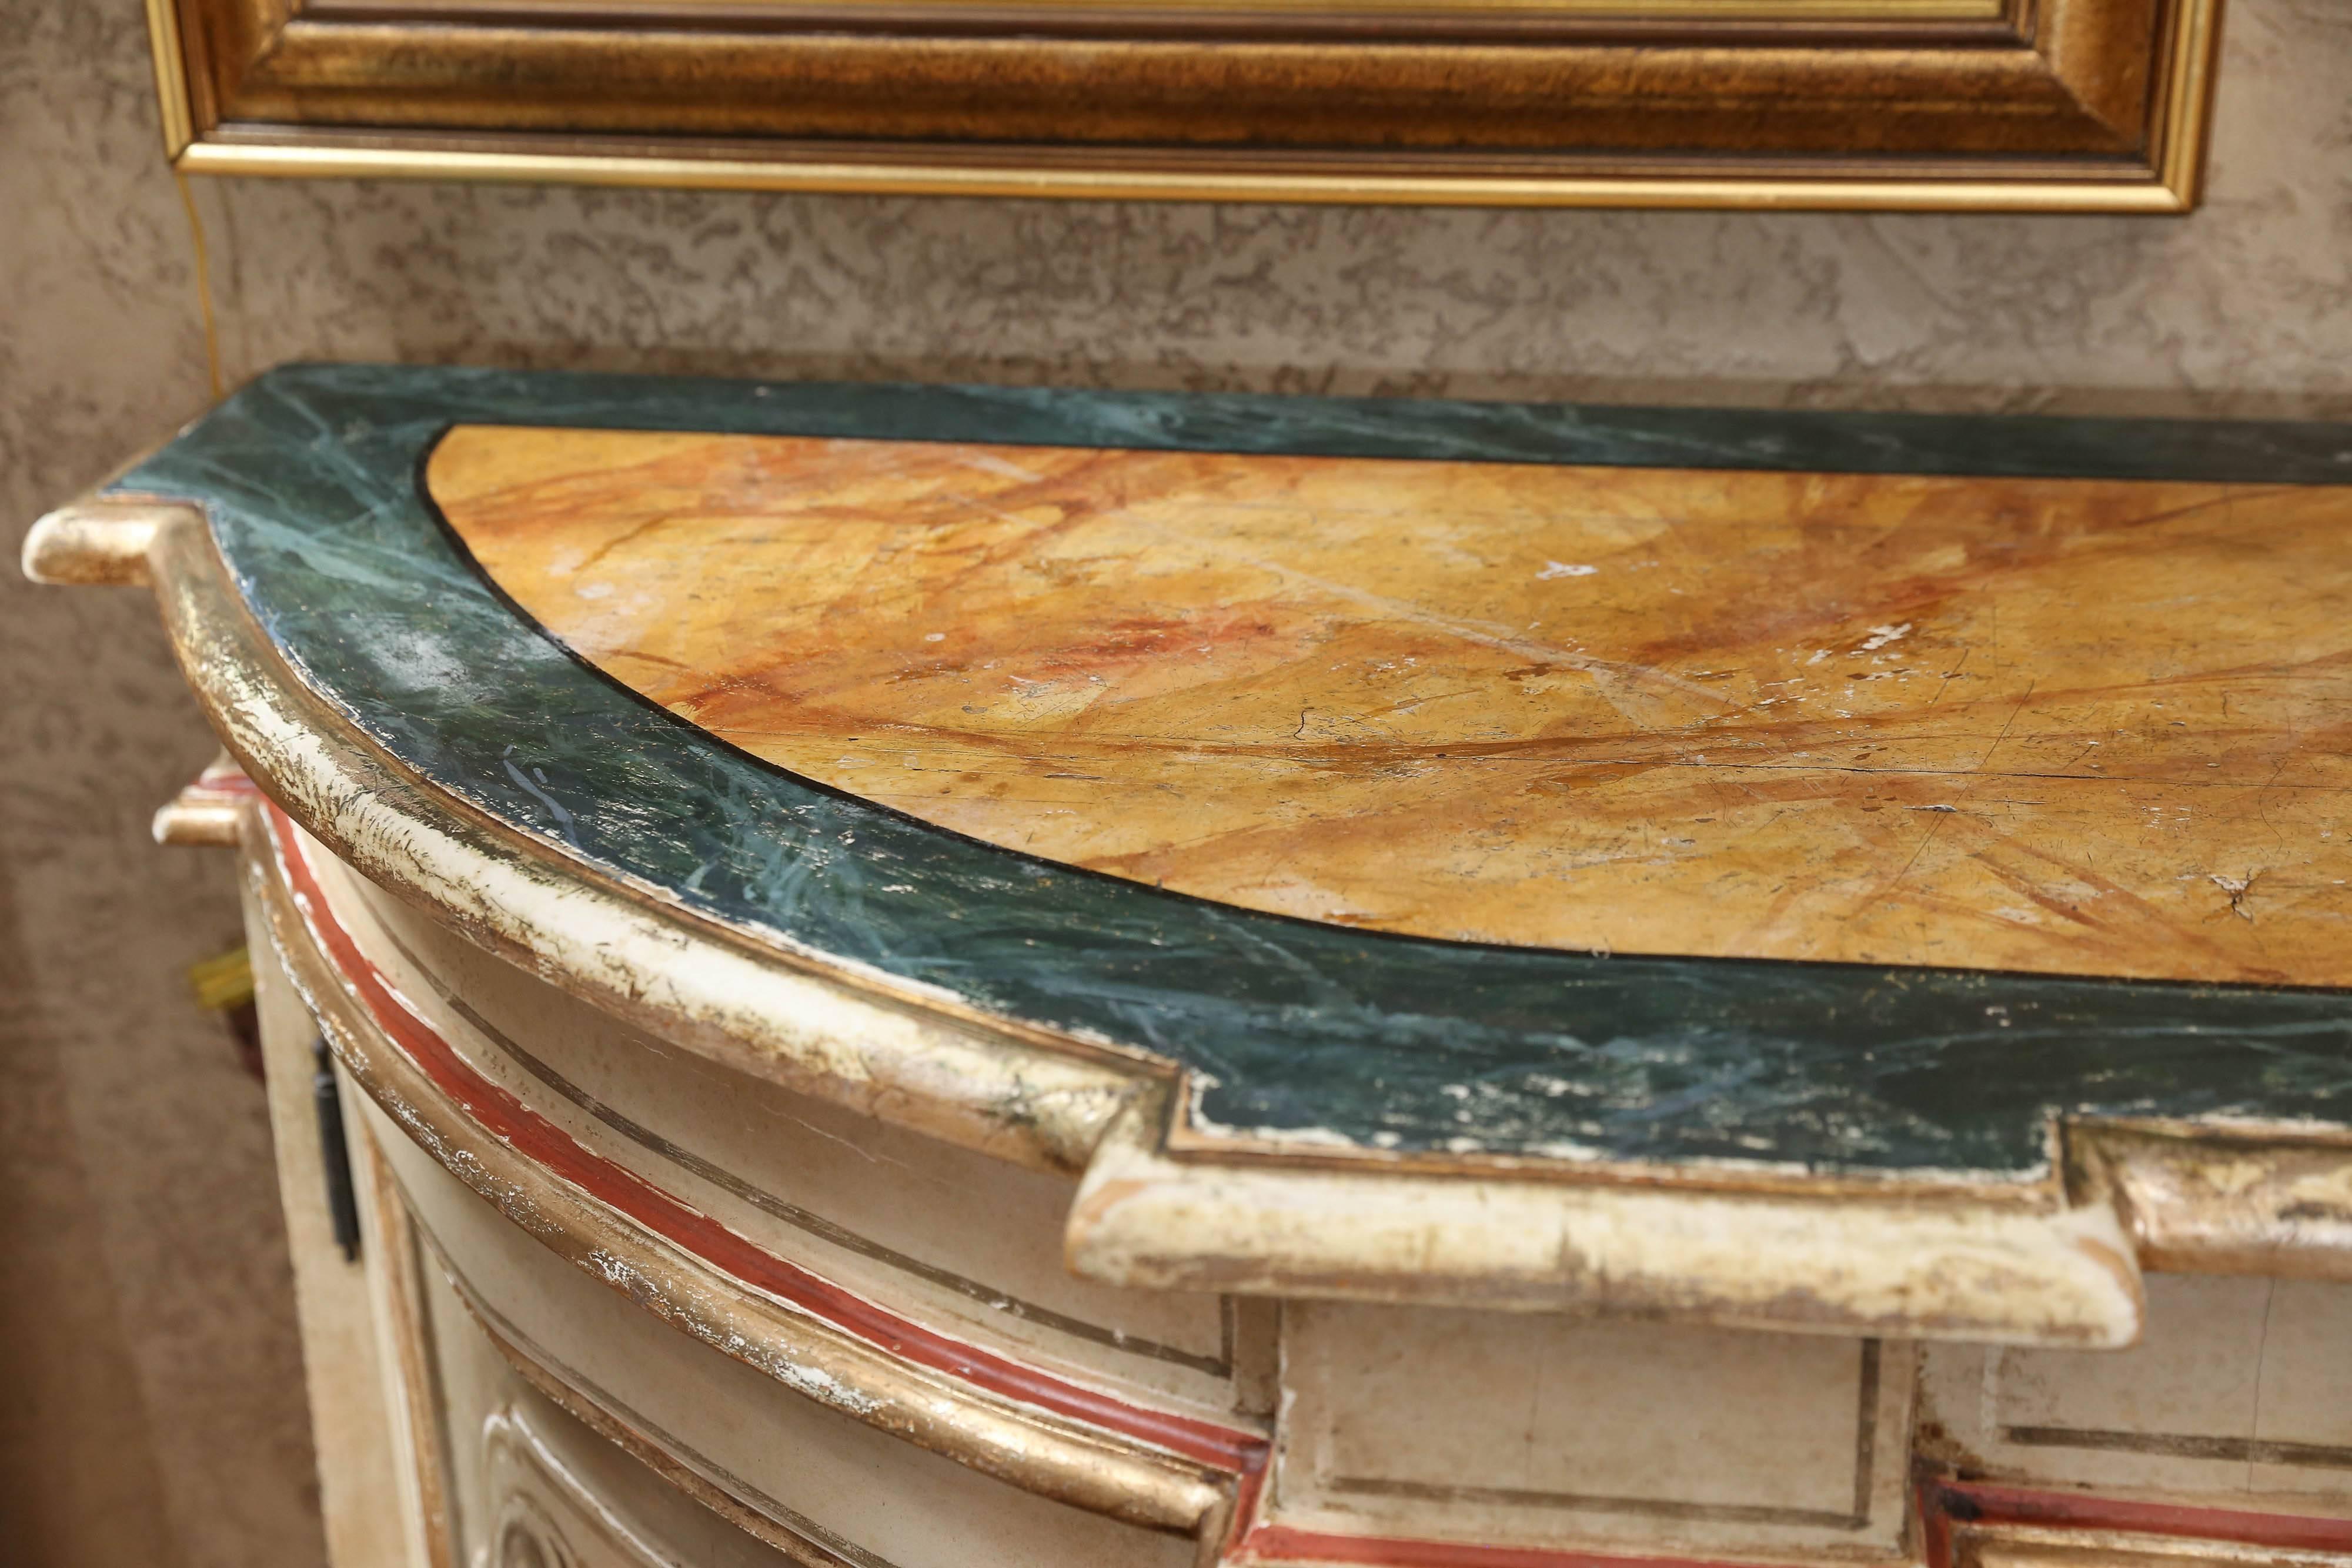 Polychromed Italian Polychrome Credenza or Buffet with Faux Marble Top, Early 19th Century